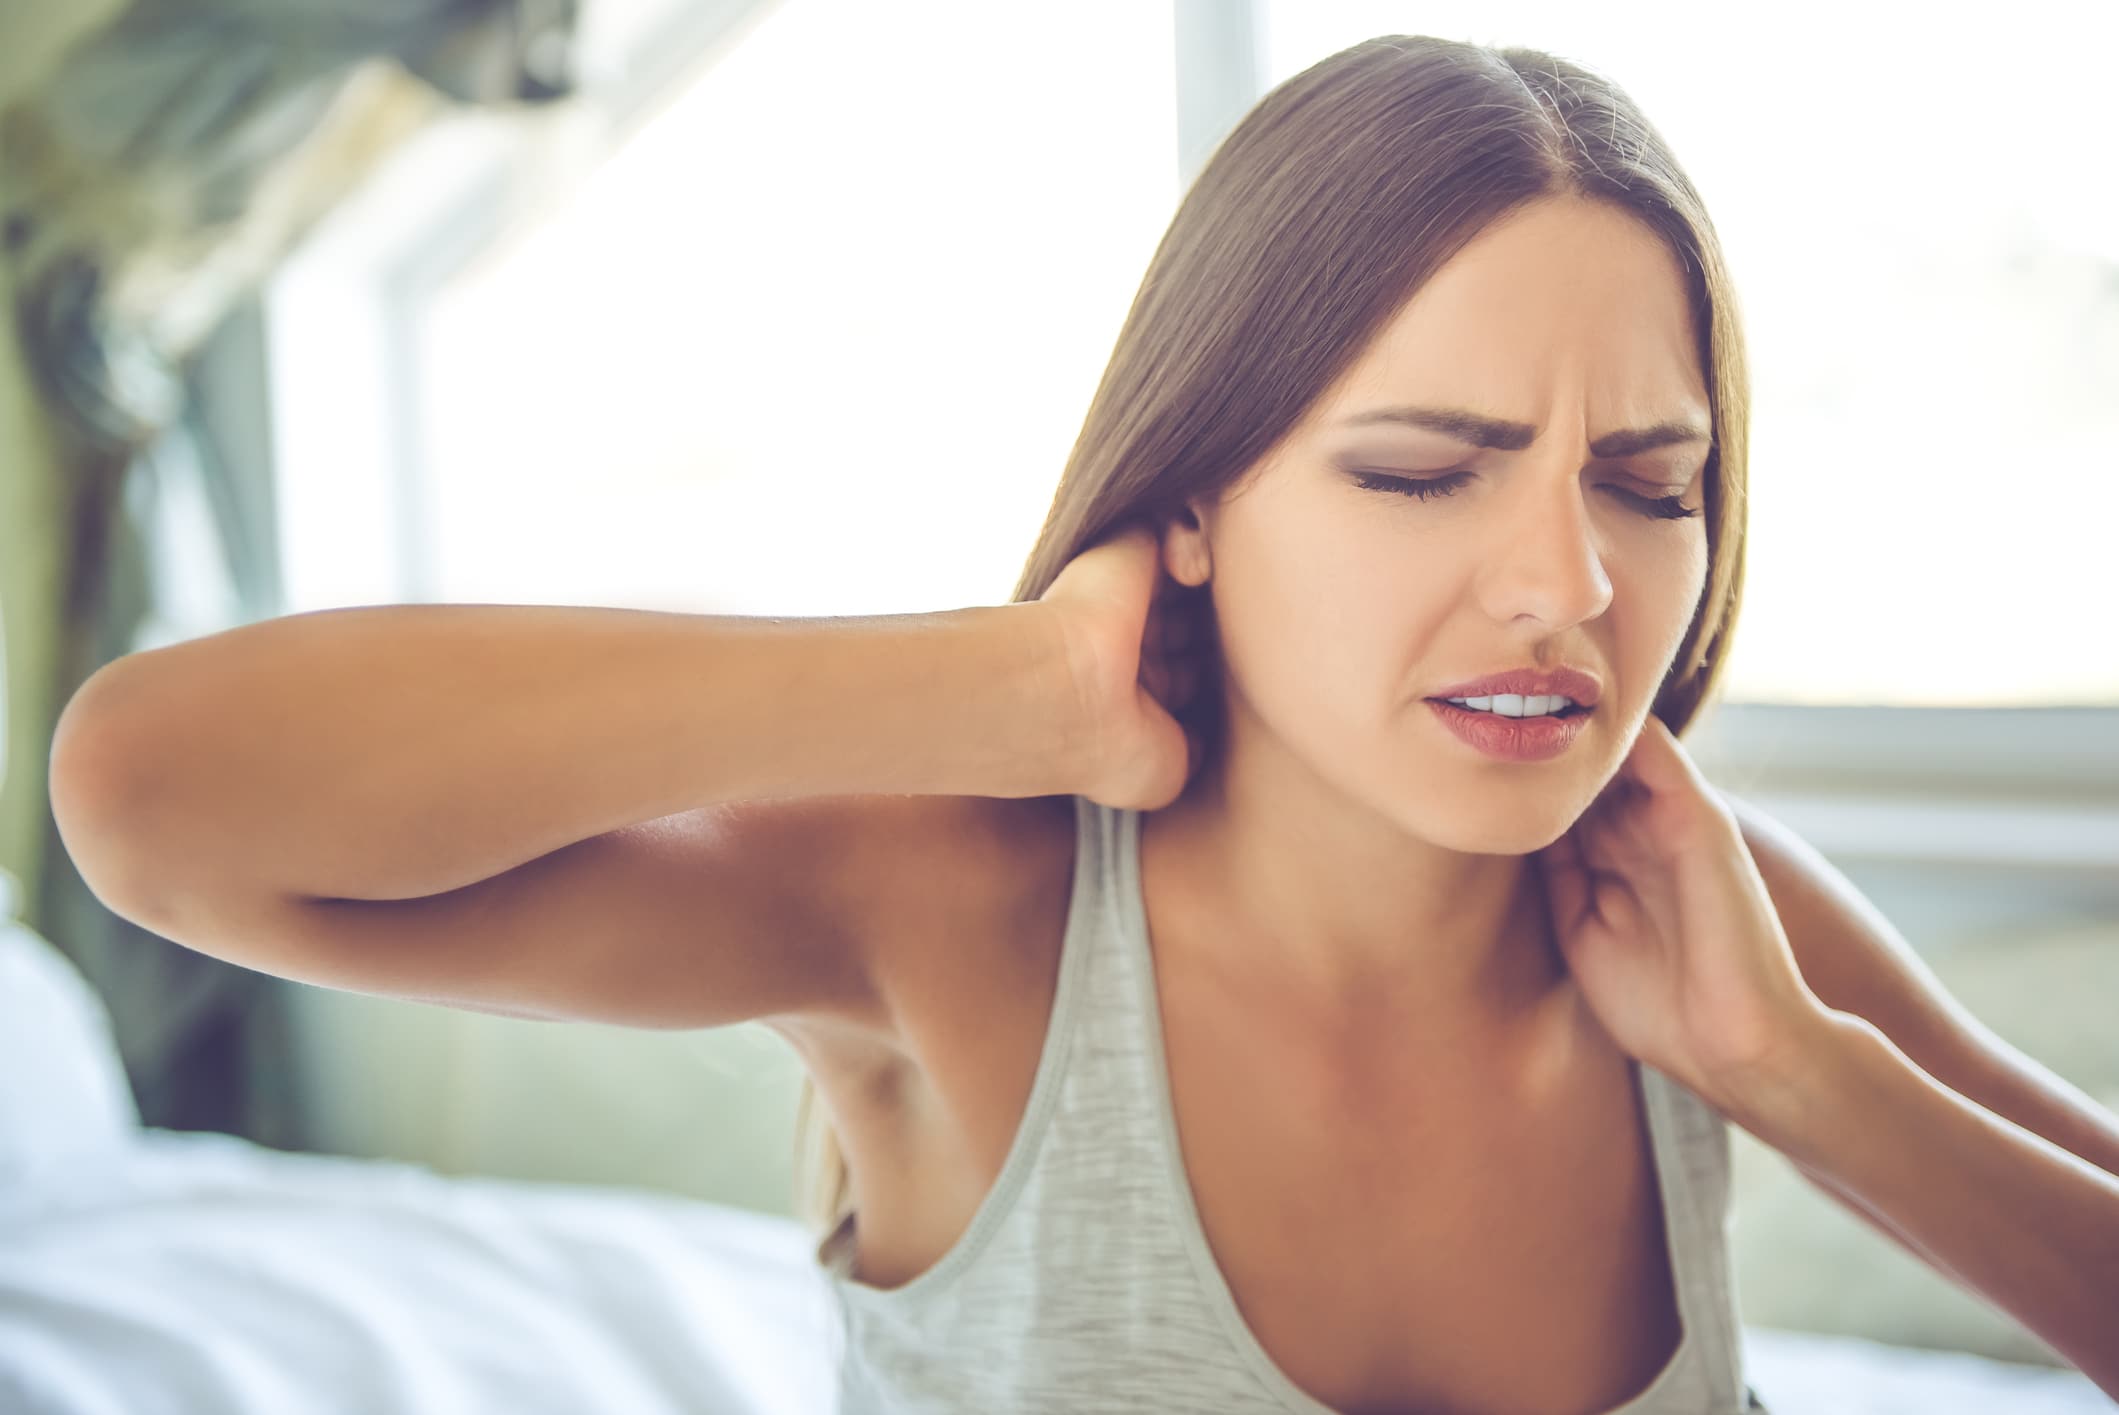 How to know when neck pain is serious